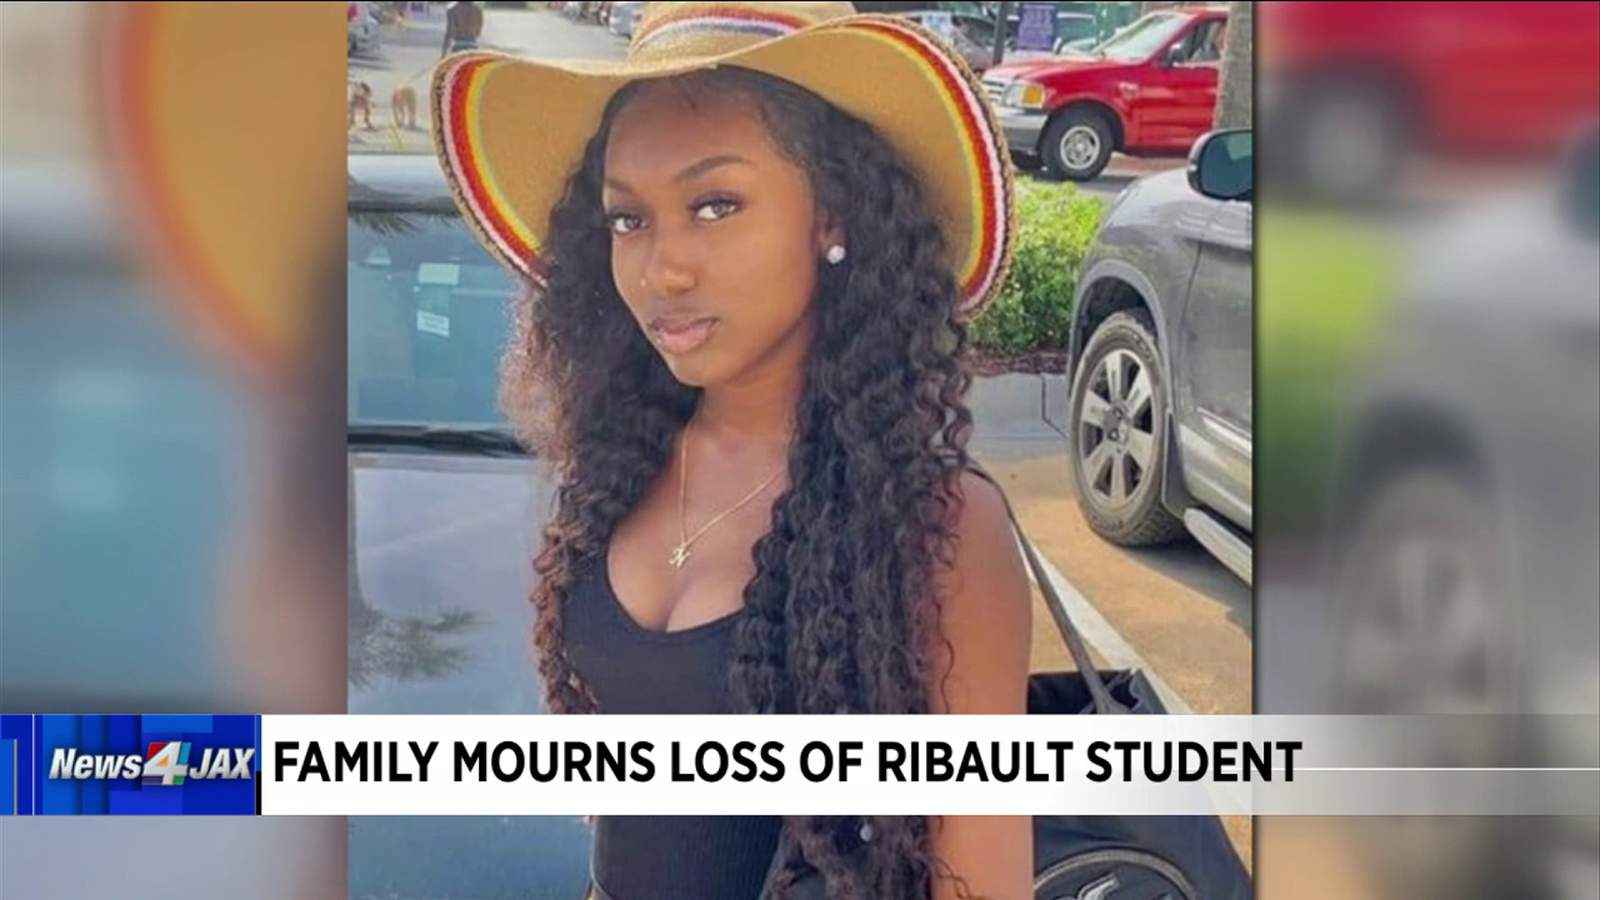 Family grieves 17-year-old Ribault student killed in shooting